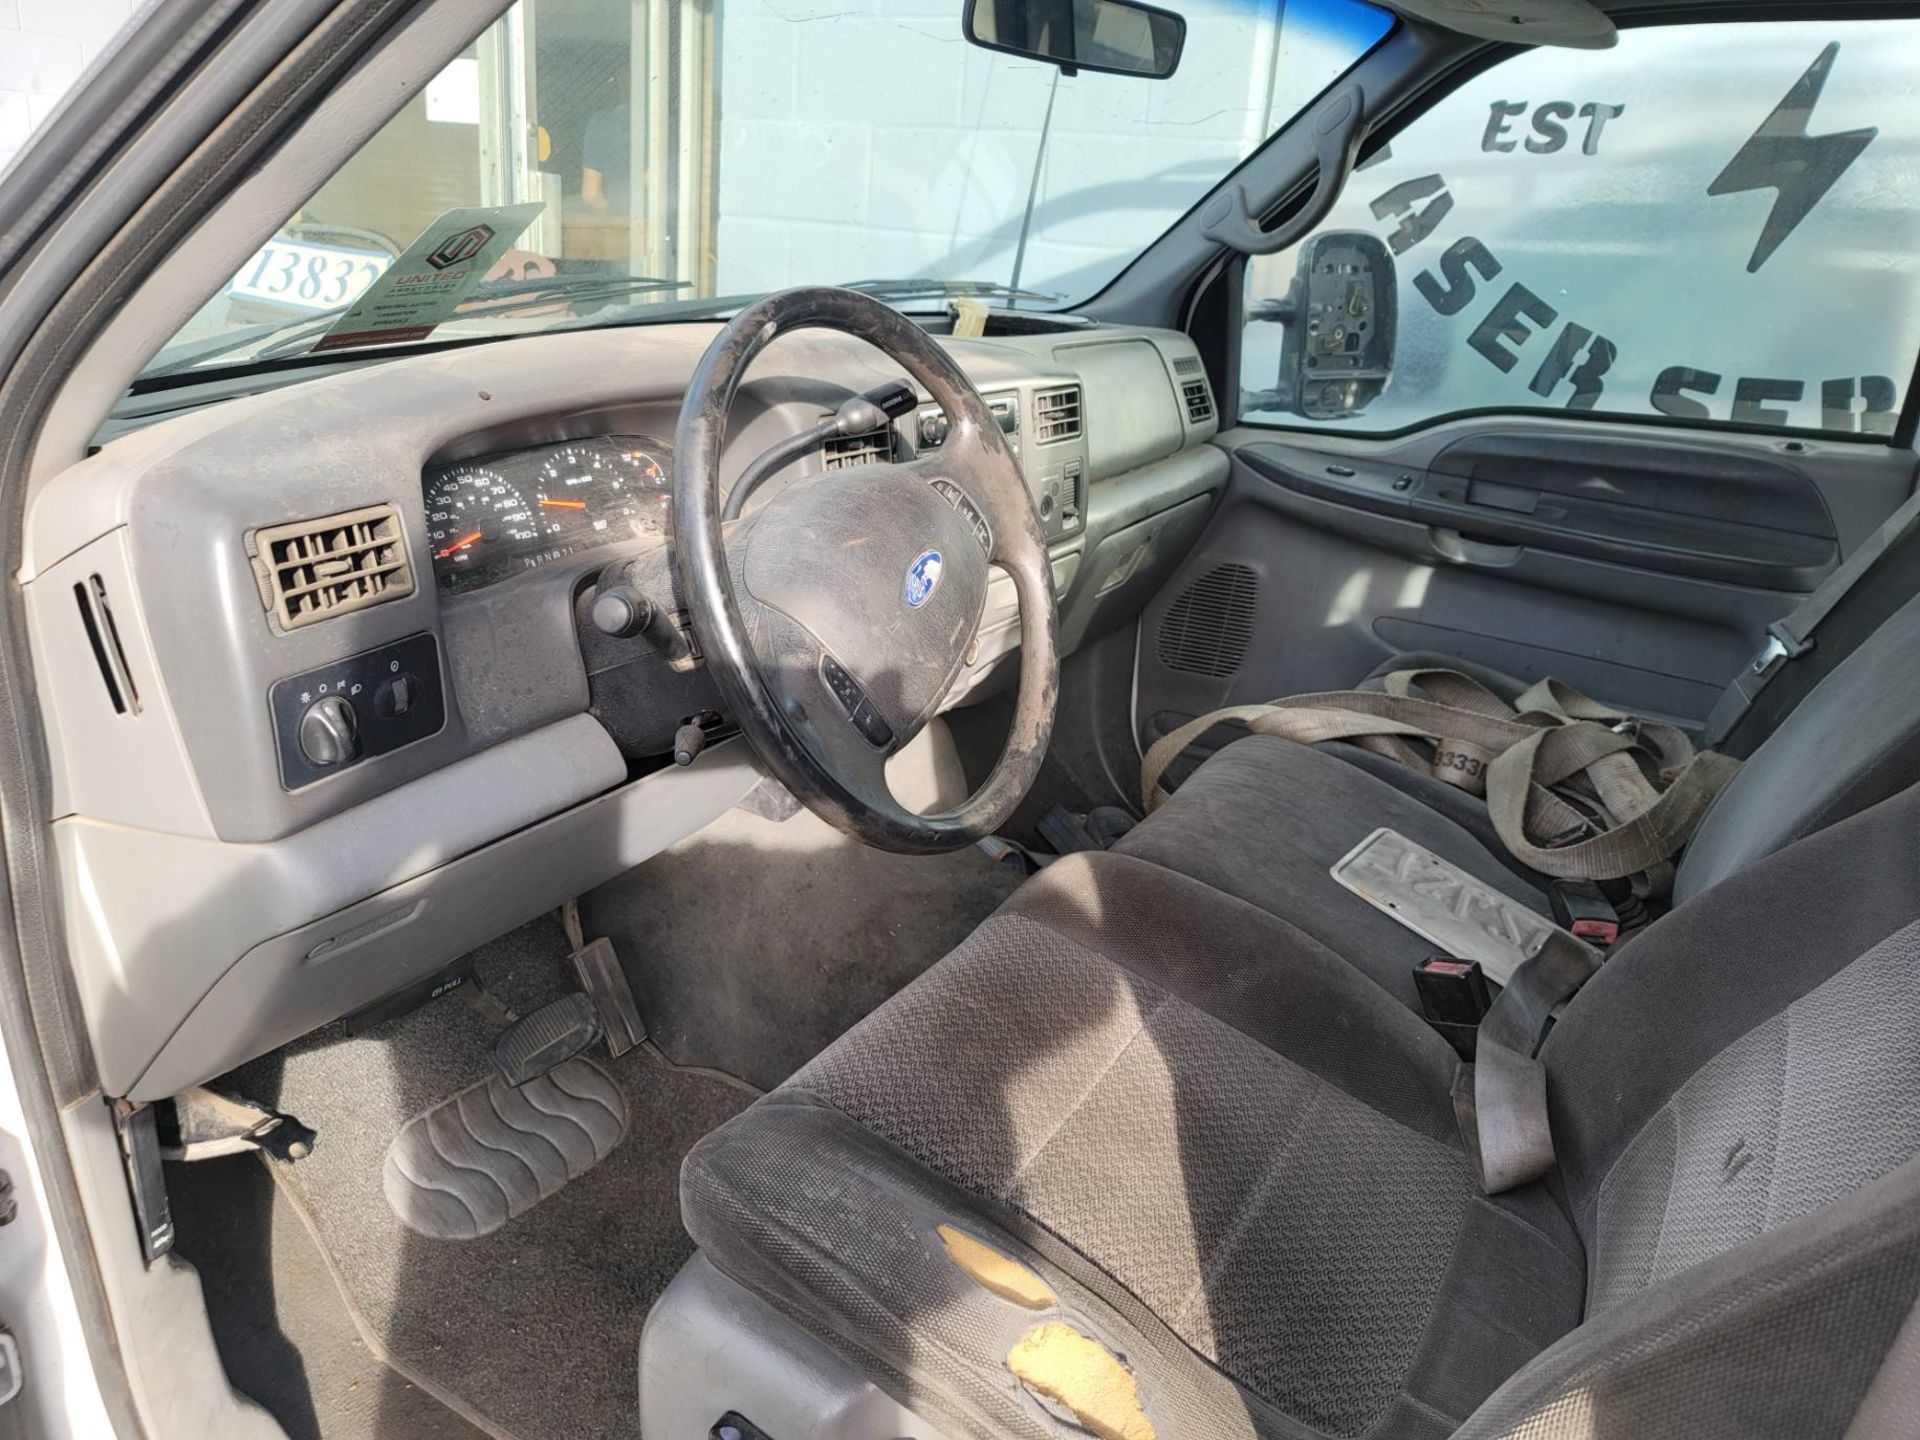 2002 FORD F-250 SUPER DUTY GAS PICKUP TRUCK, EXTRA CAB, PULL OUT SLIDING BED, TRITON V-10, VIN: - Image 7 of 12